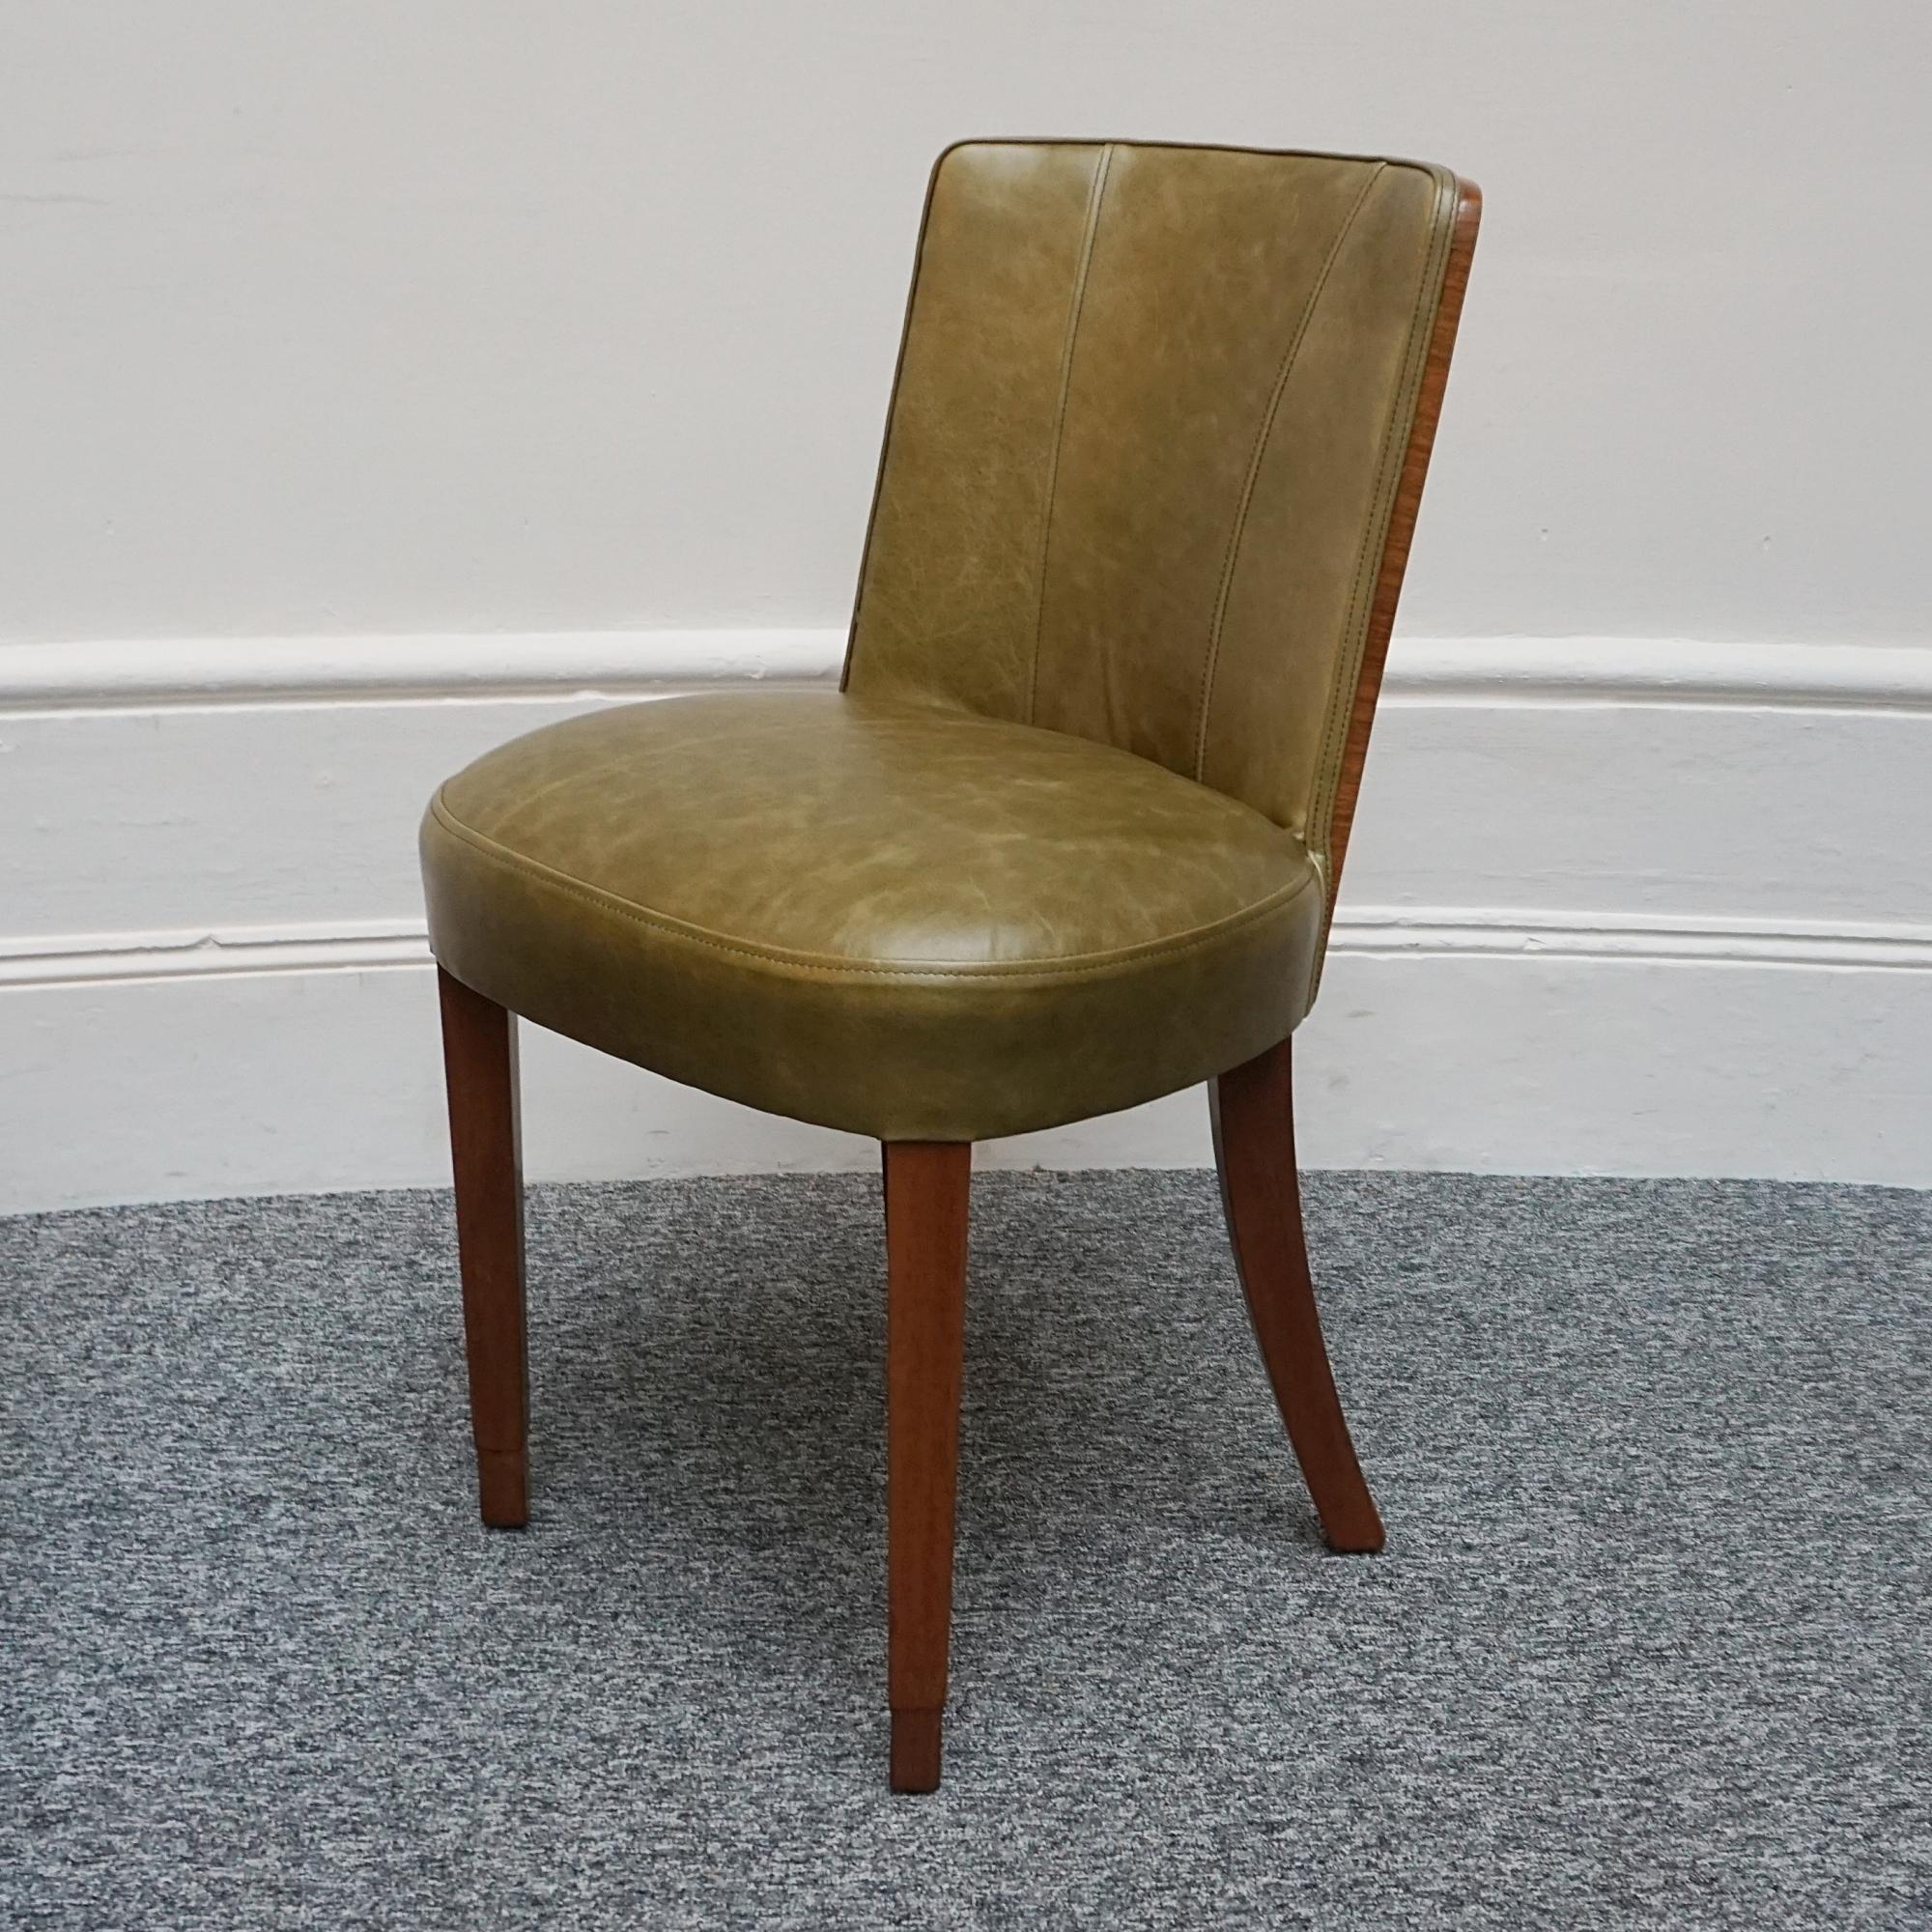 An Art Deco side chair. Olive green re-upholstery with contrasting figured walnut backs and solid walnut legs. 

All of our furniture is extensively polished and restored where necessary to the highest standards.

